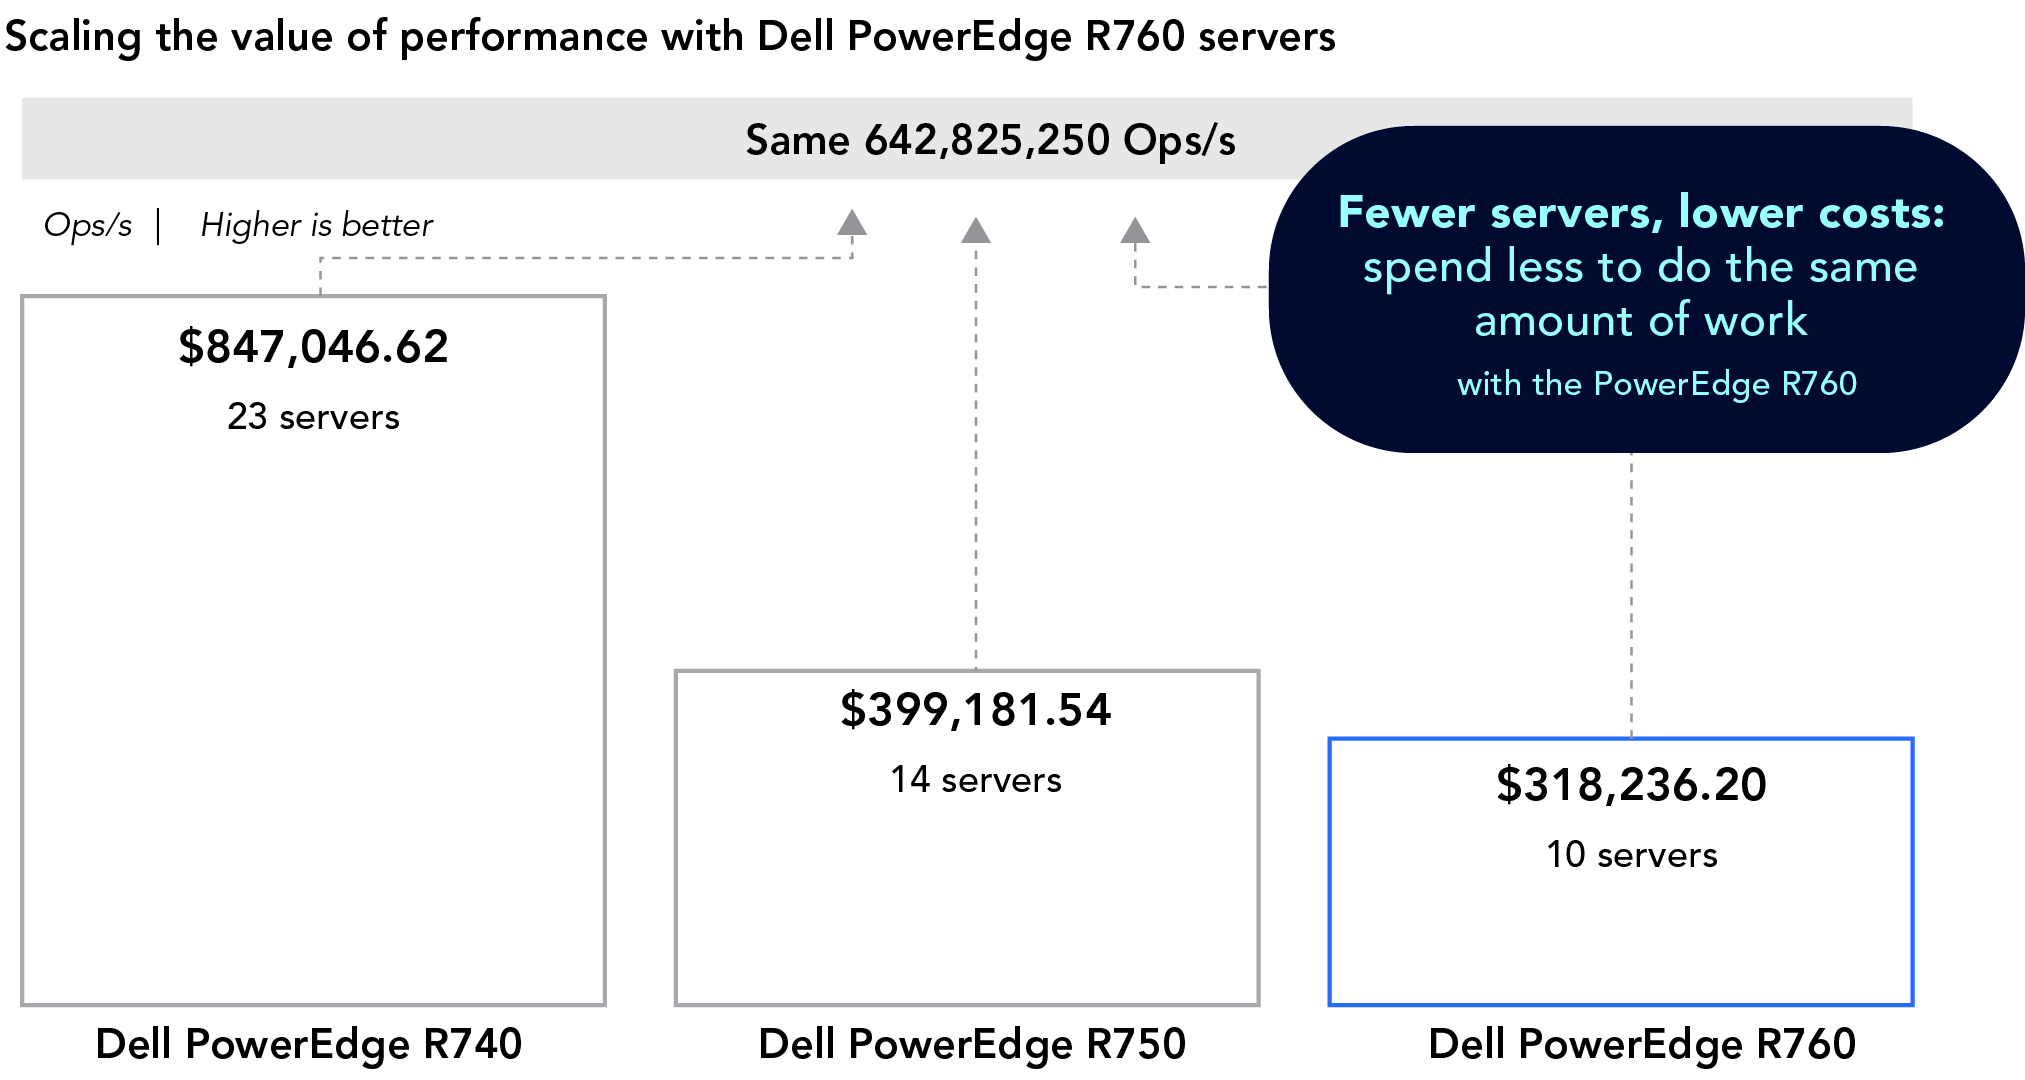 Scaling the value of performance with Dell PowerEdge R760 servers. Bar chart comparing how many servers of each generation it would take to achieve 642,825,250 Ops/s. You would need 23 PowerEdge R740 servers, which would cost $847,046.62; 14 PowerEdge R750 servers, which would cost $399,181.54; or 10 PowerEdge R760 servers, which would cost $318,236.20. Fewer servers, lower costs: Spend less to do the same amount of work with the PowerEdge R760.